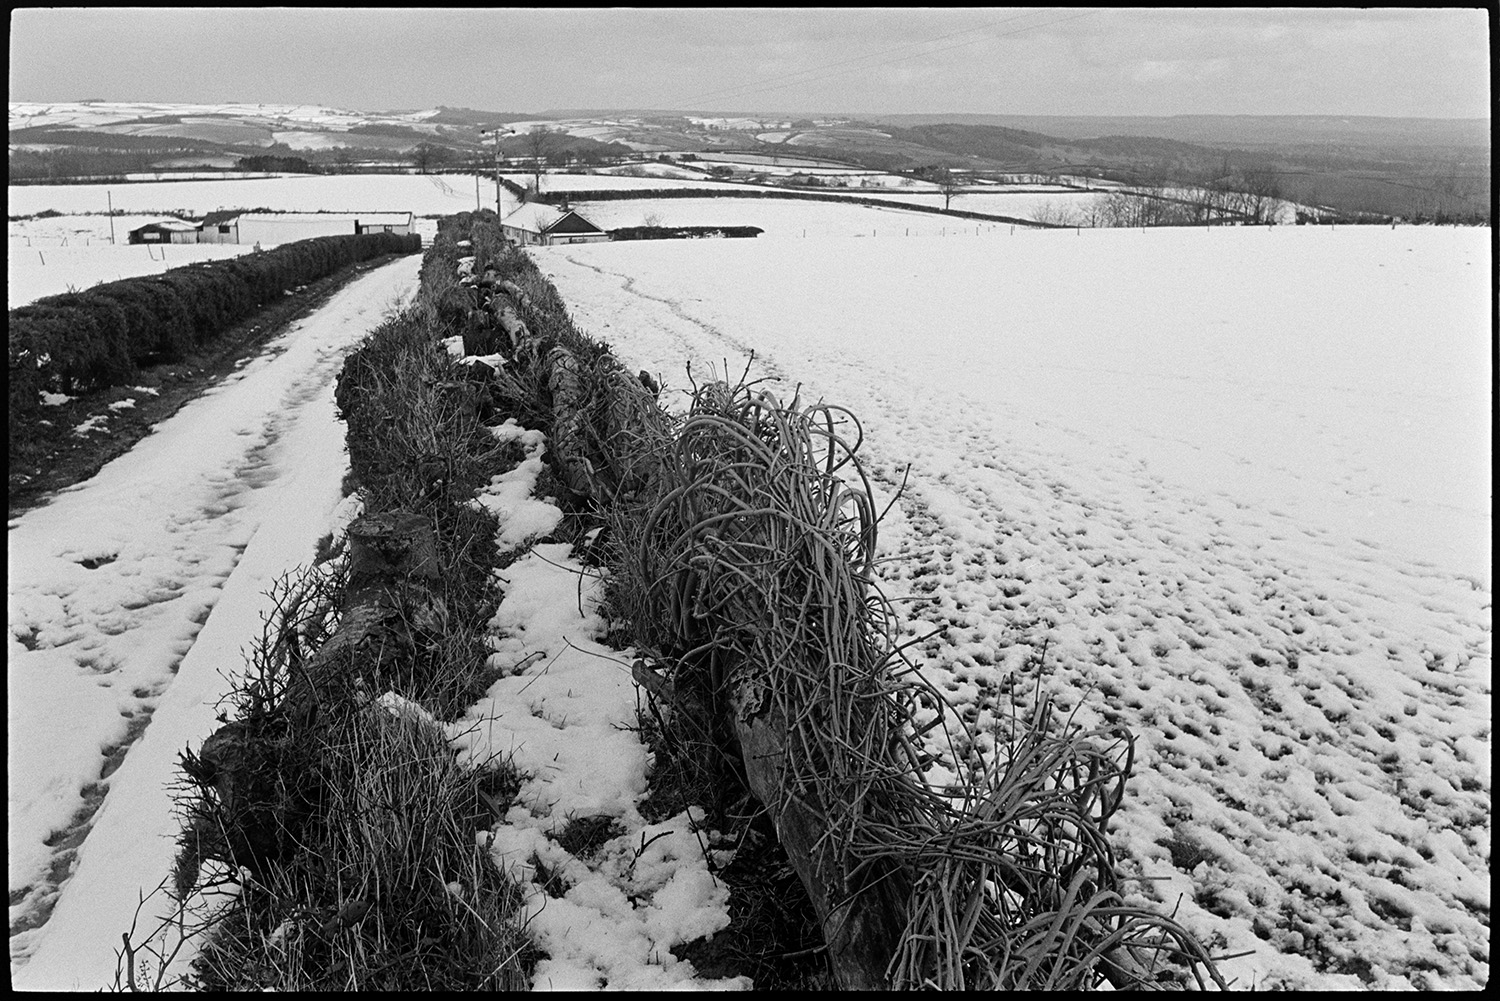 Snow, hedge laid like basket against snowy fields. 
[A view taken from above a laid hedge of surrounding snow covered fields an a lane near Knowstone, Exmoor. Farm buildings can also be seen in the background.]